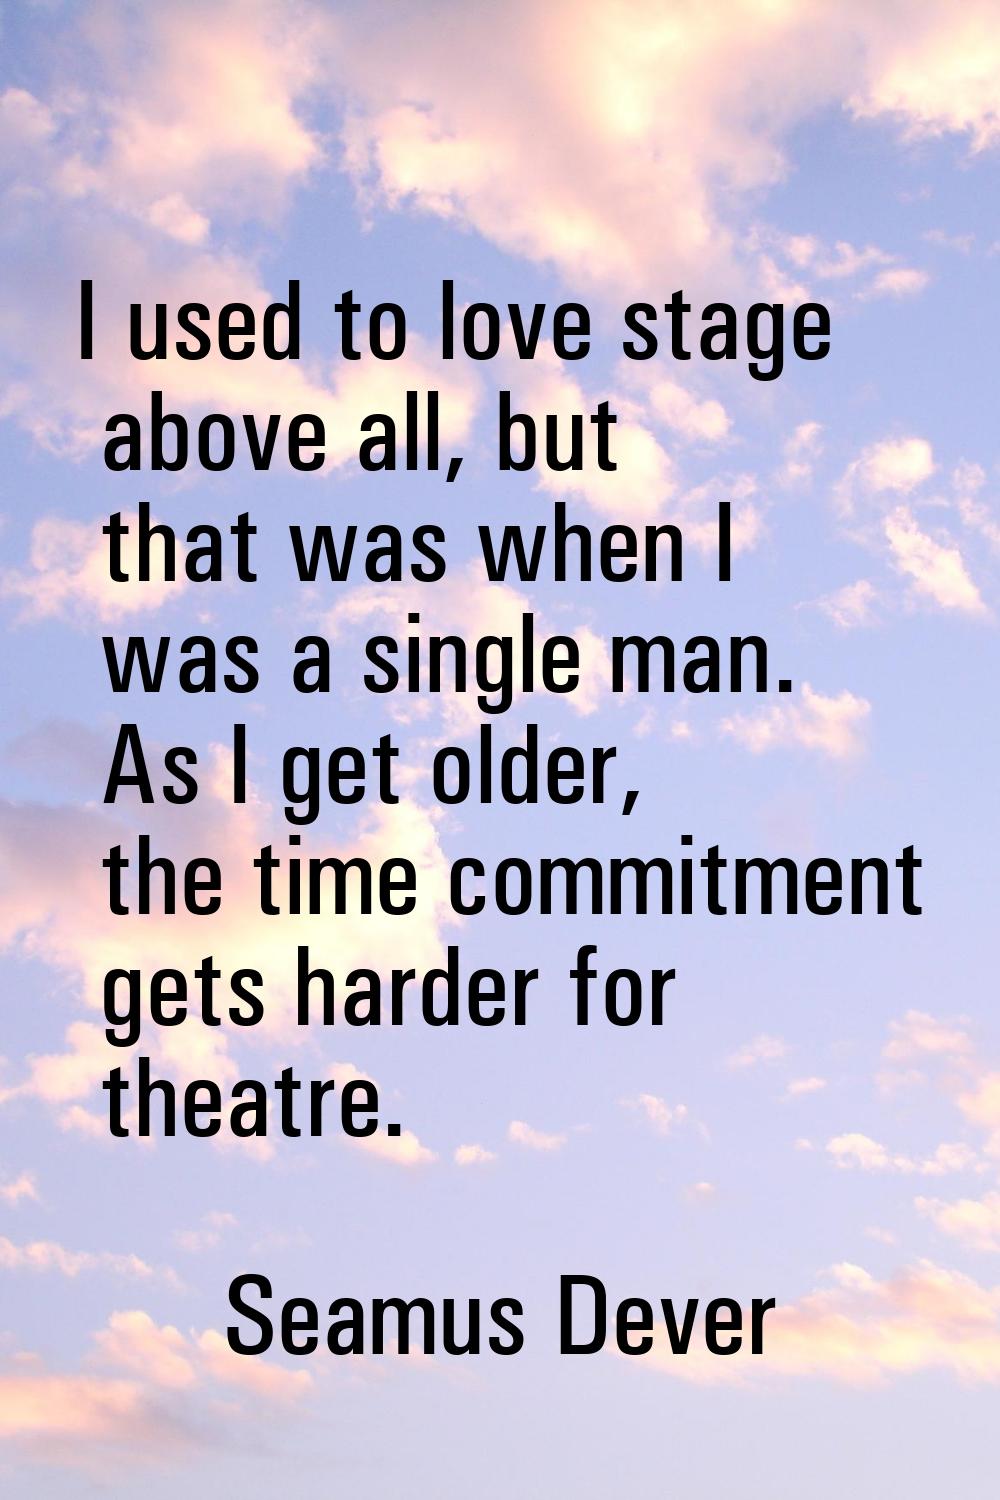 I used to love stage above all, but that was when I was a single man. As I get older, the time comm